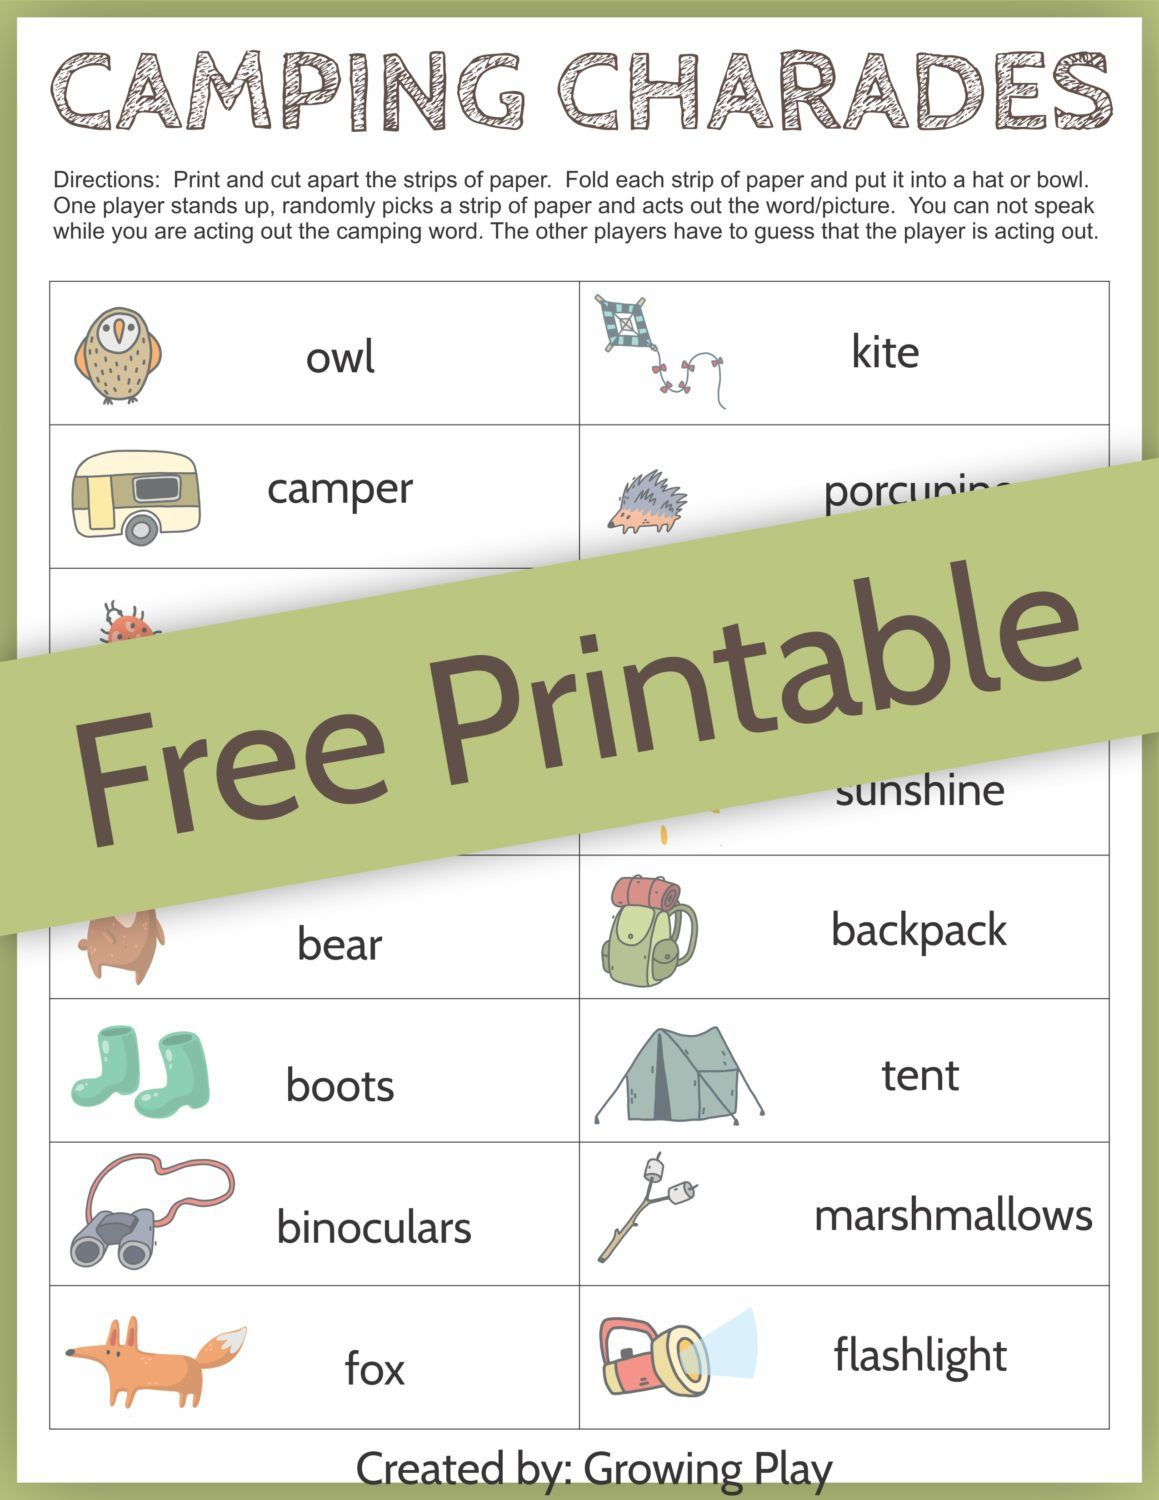 Camping Charades Game For Kids - Free Printable | Camping | Games - Free Printable Camping Games